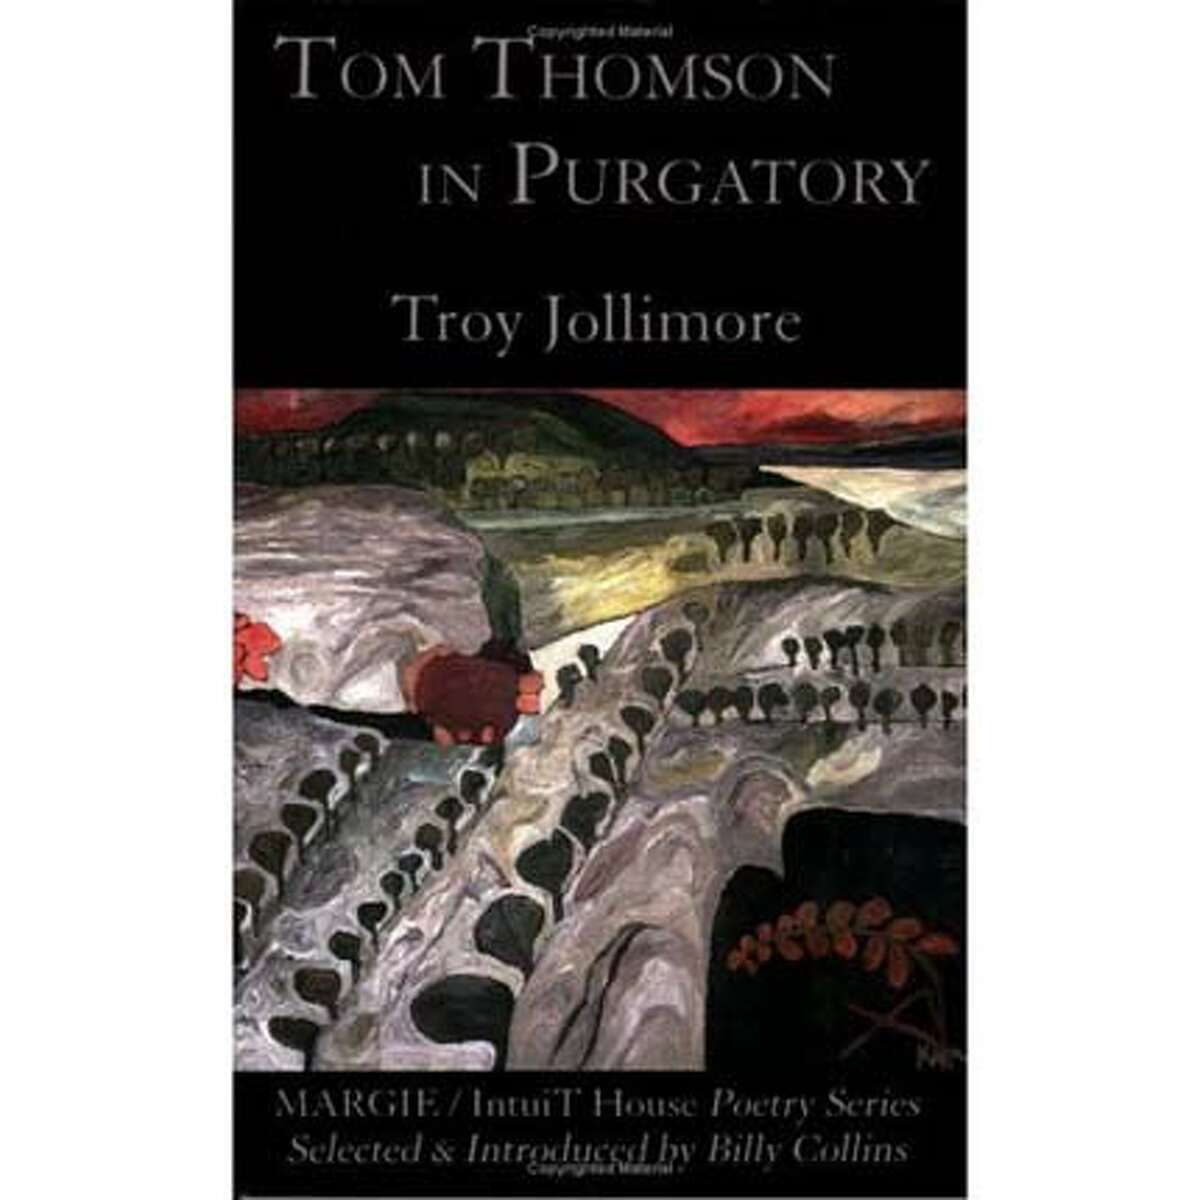 "Tom Thomson in Purgatory" by Troy Jollimore